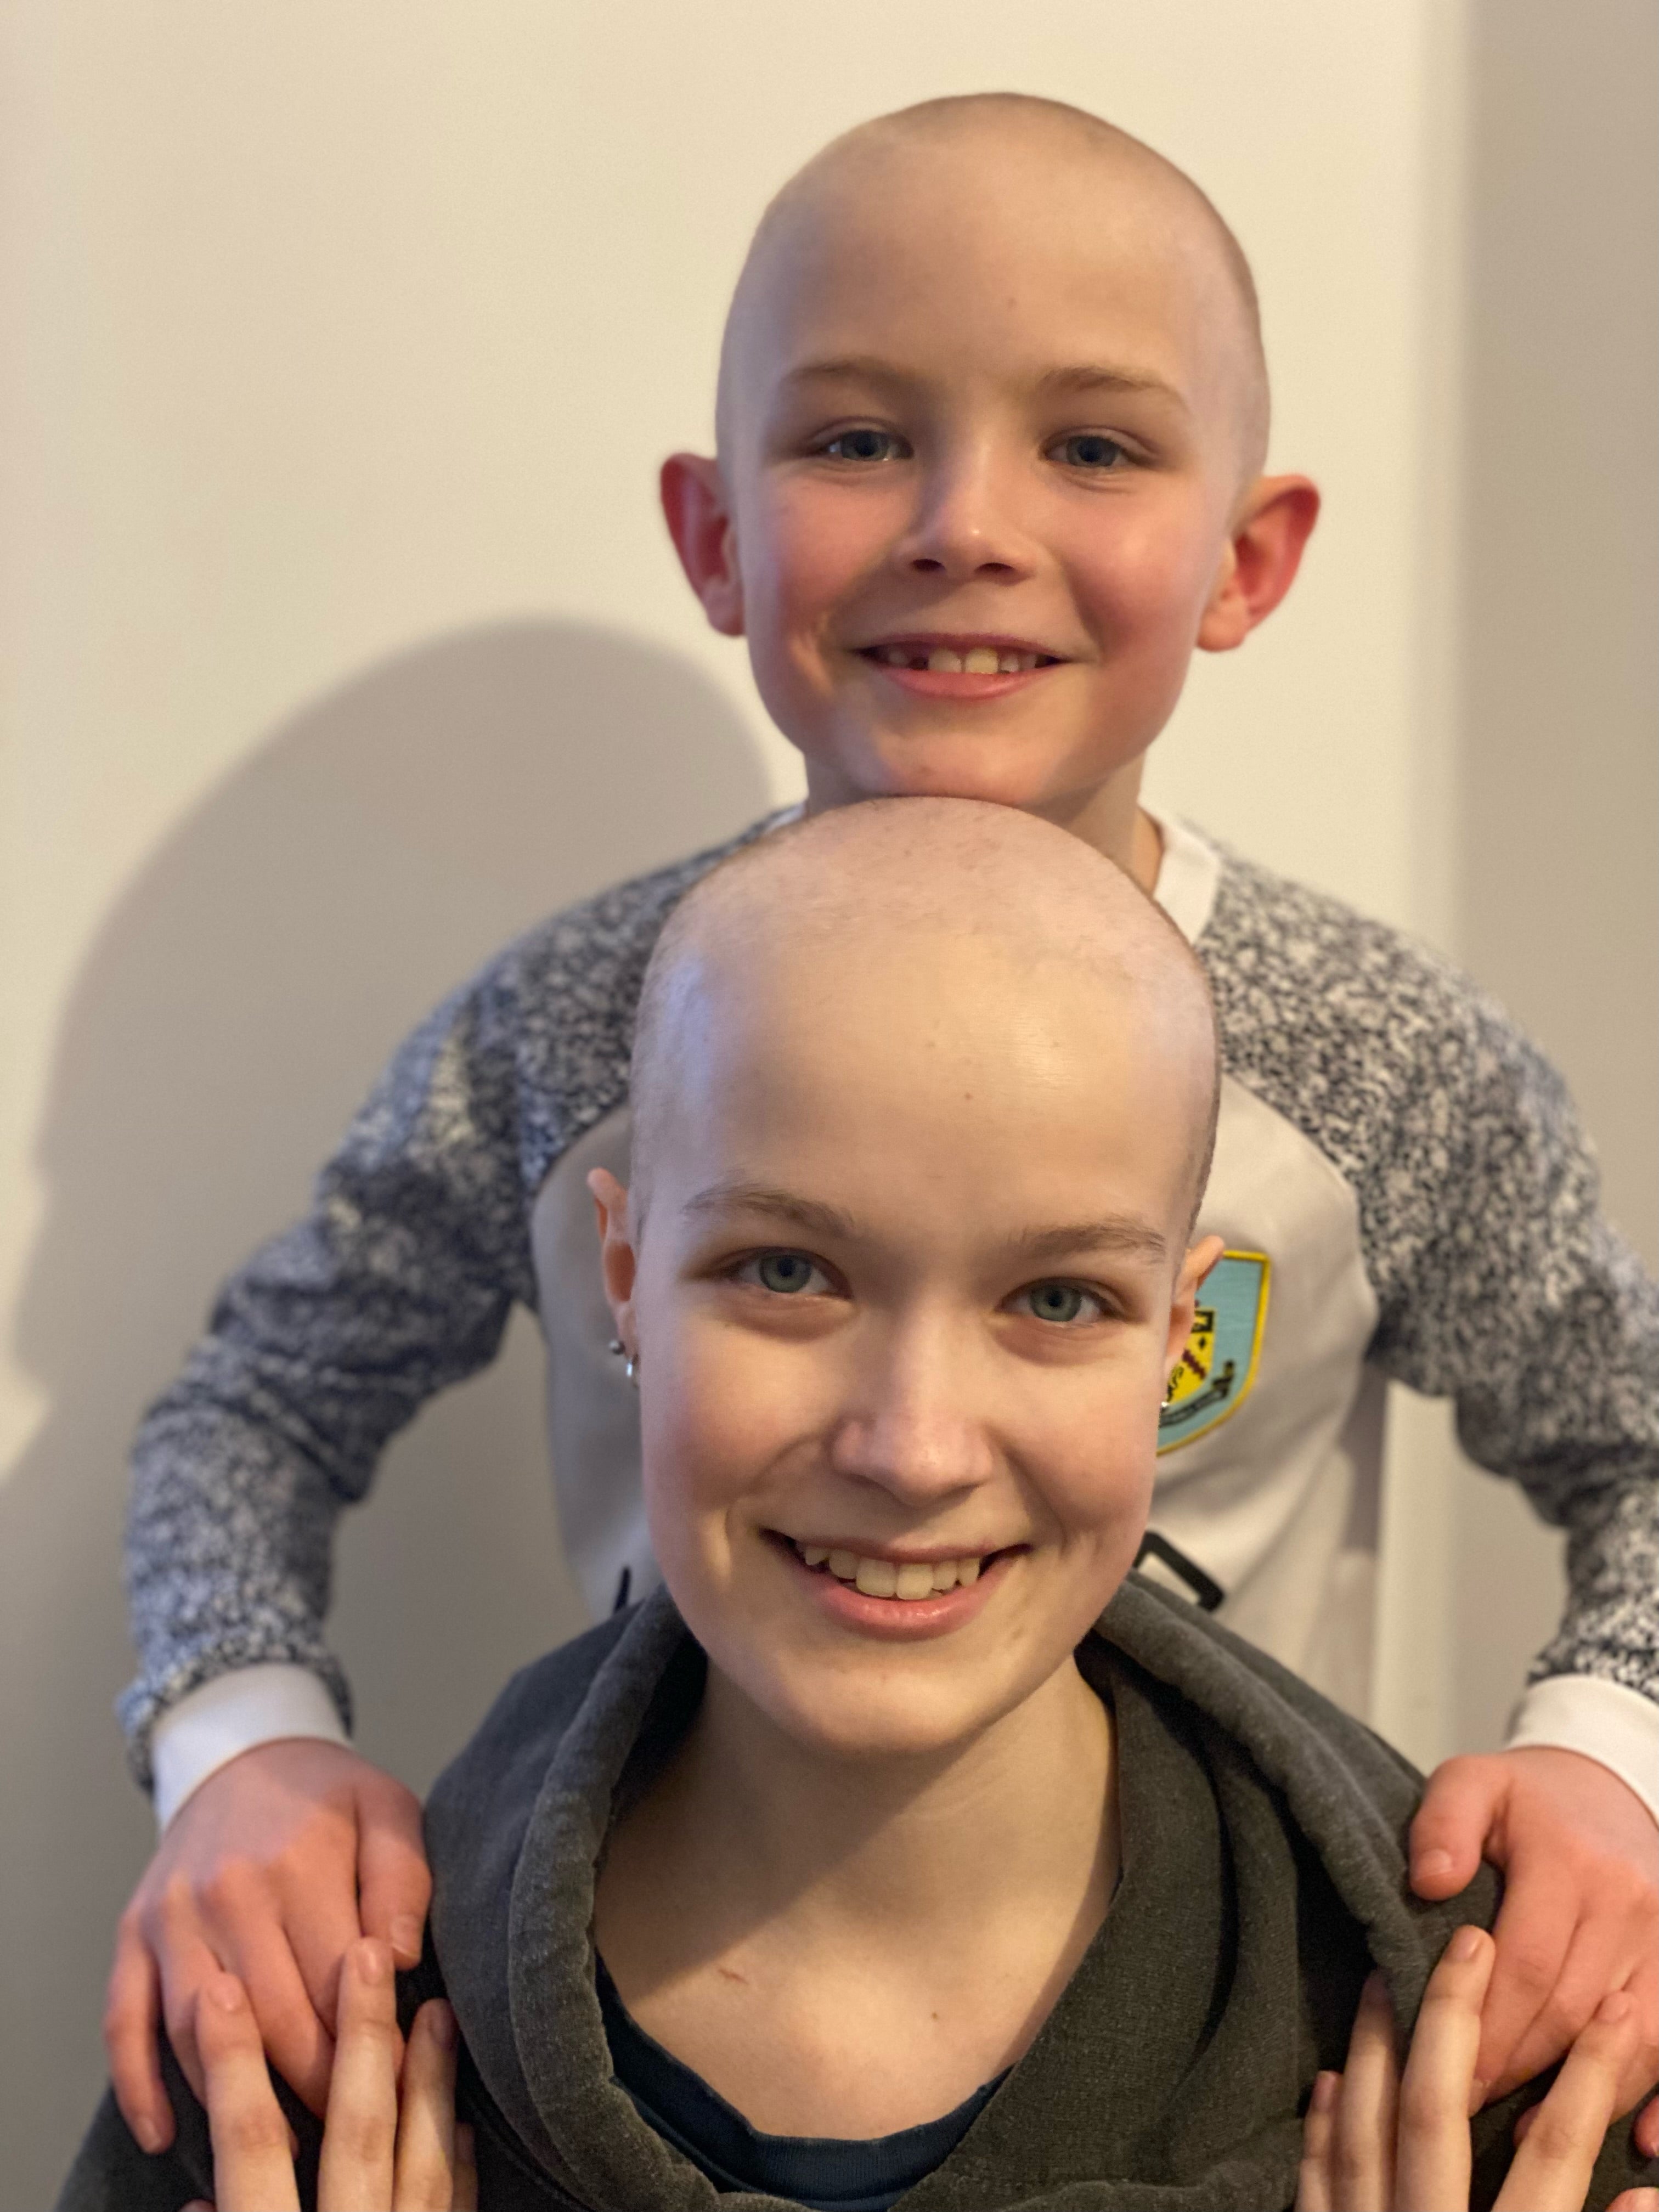 Mateo shaved his head to support his older sister